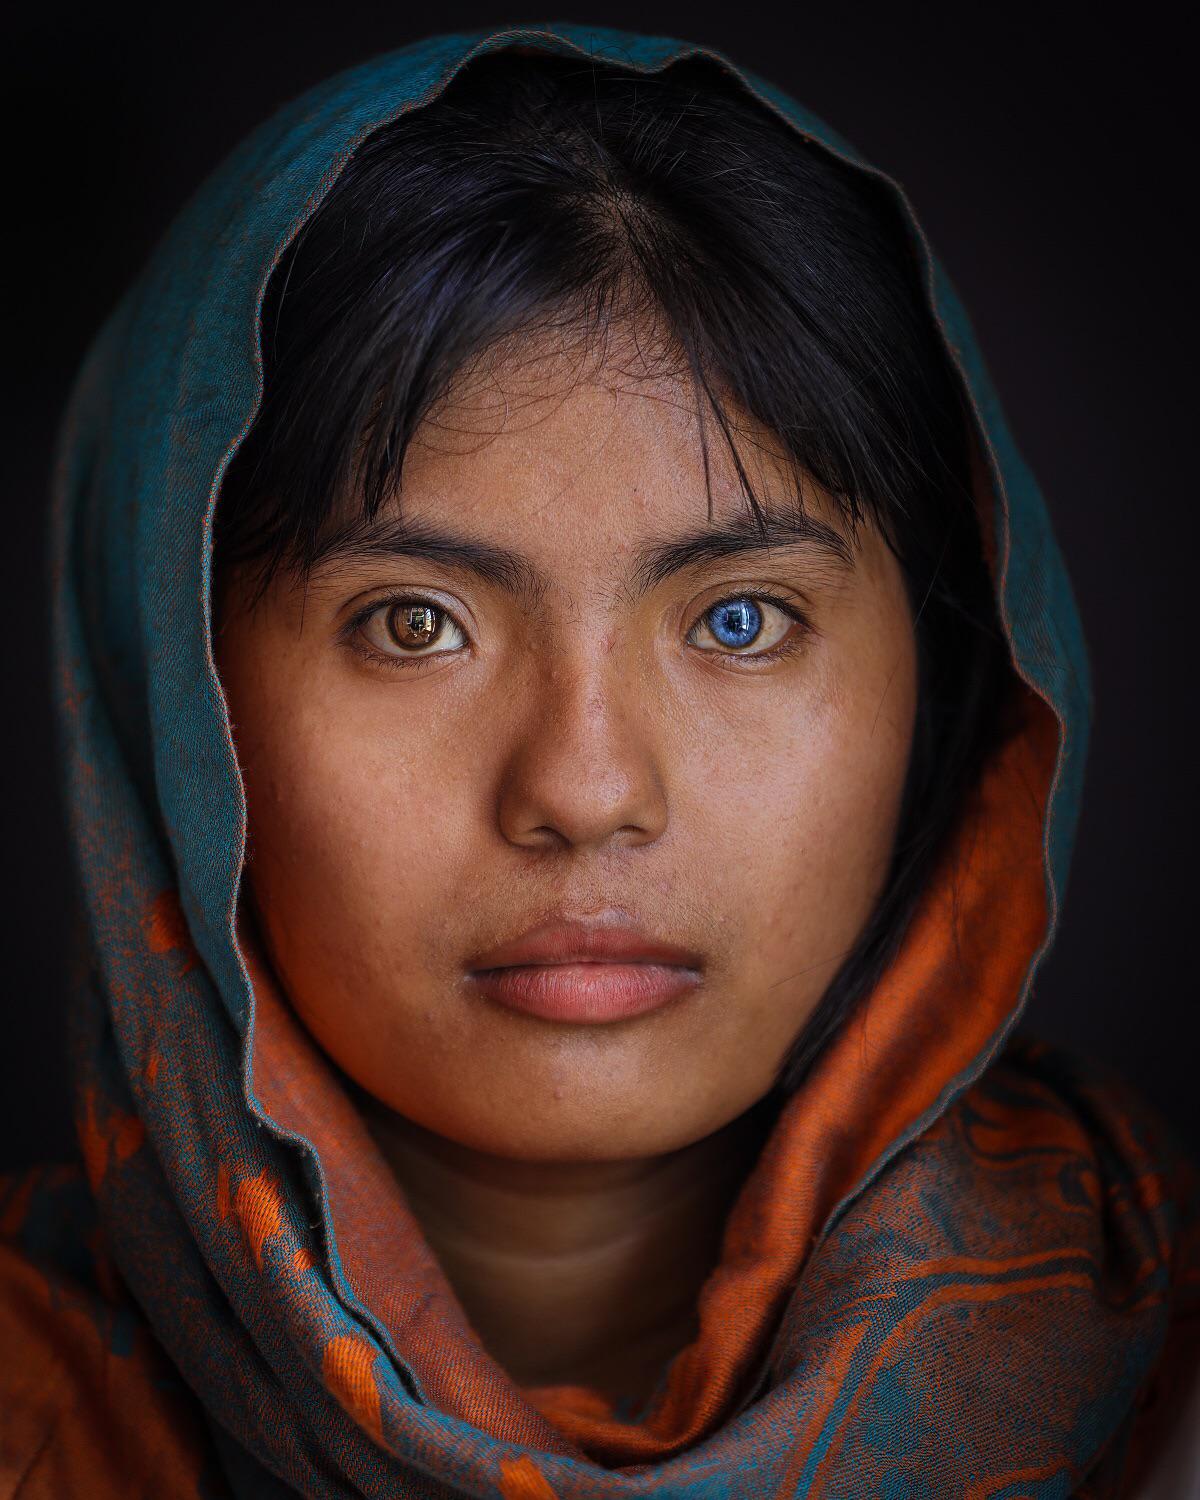 Thạch Thị Sa Pa is a young Chams woman with heterochromia iridis—one eye is blue and the other brown, Vietnam (photographed by Trần Tuấn Việt)